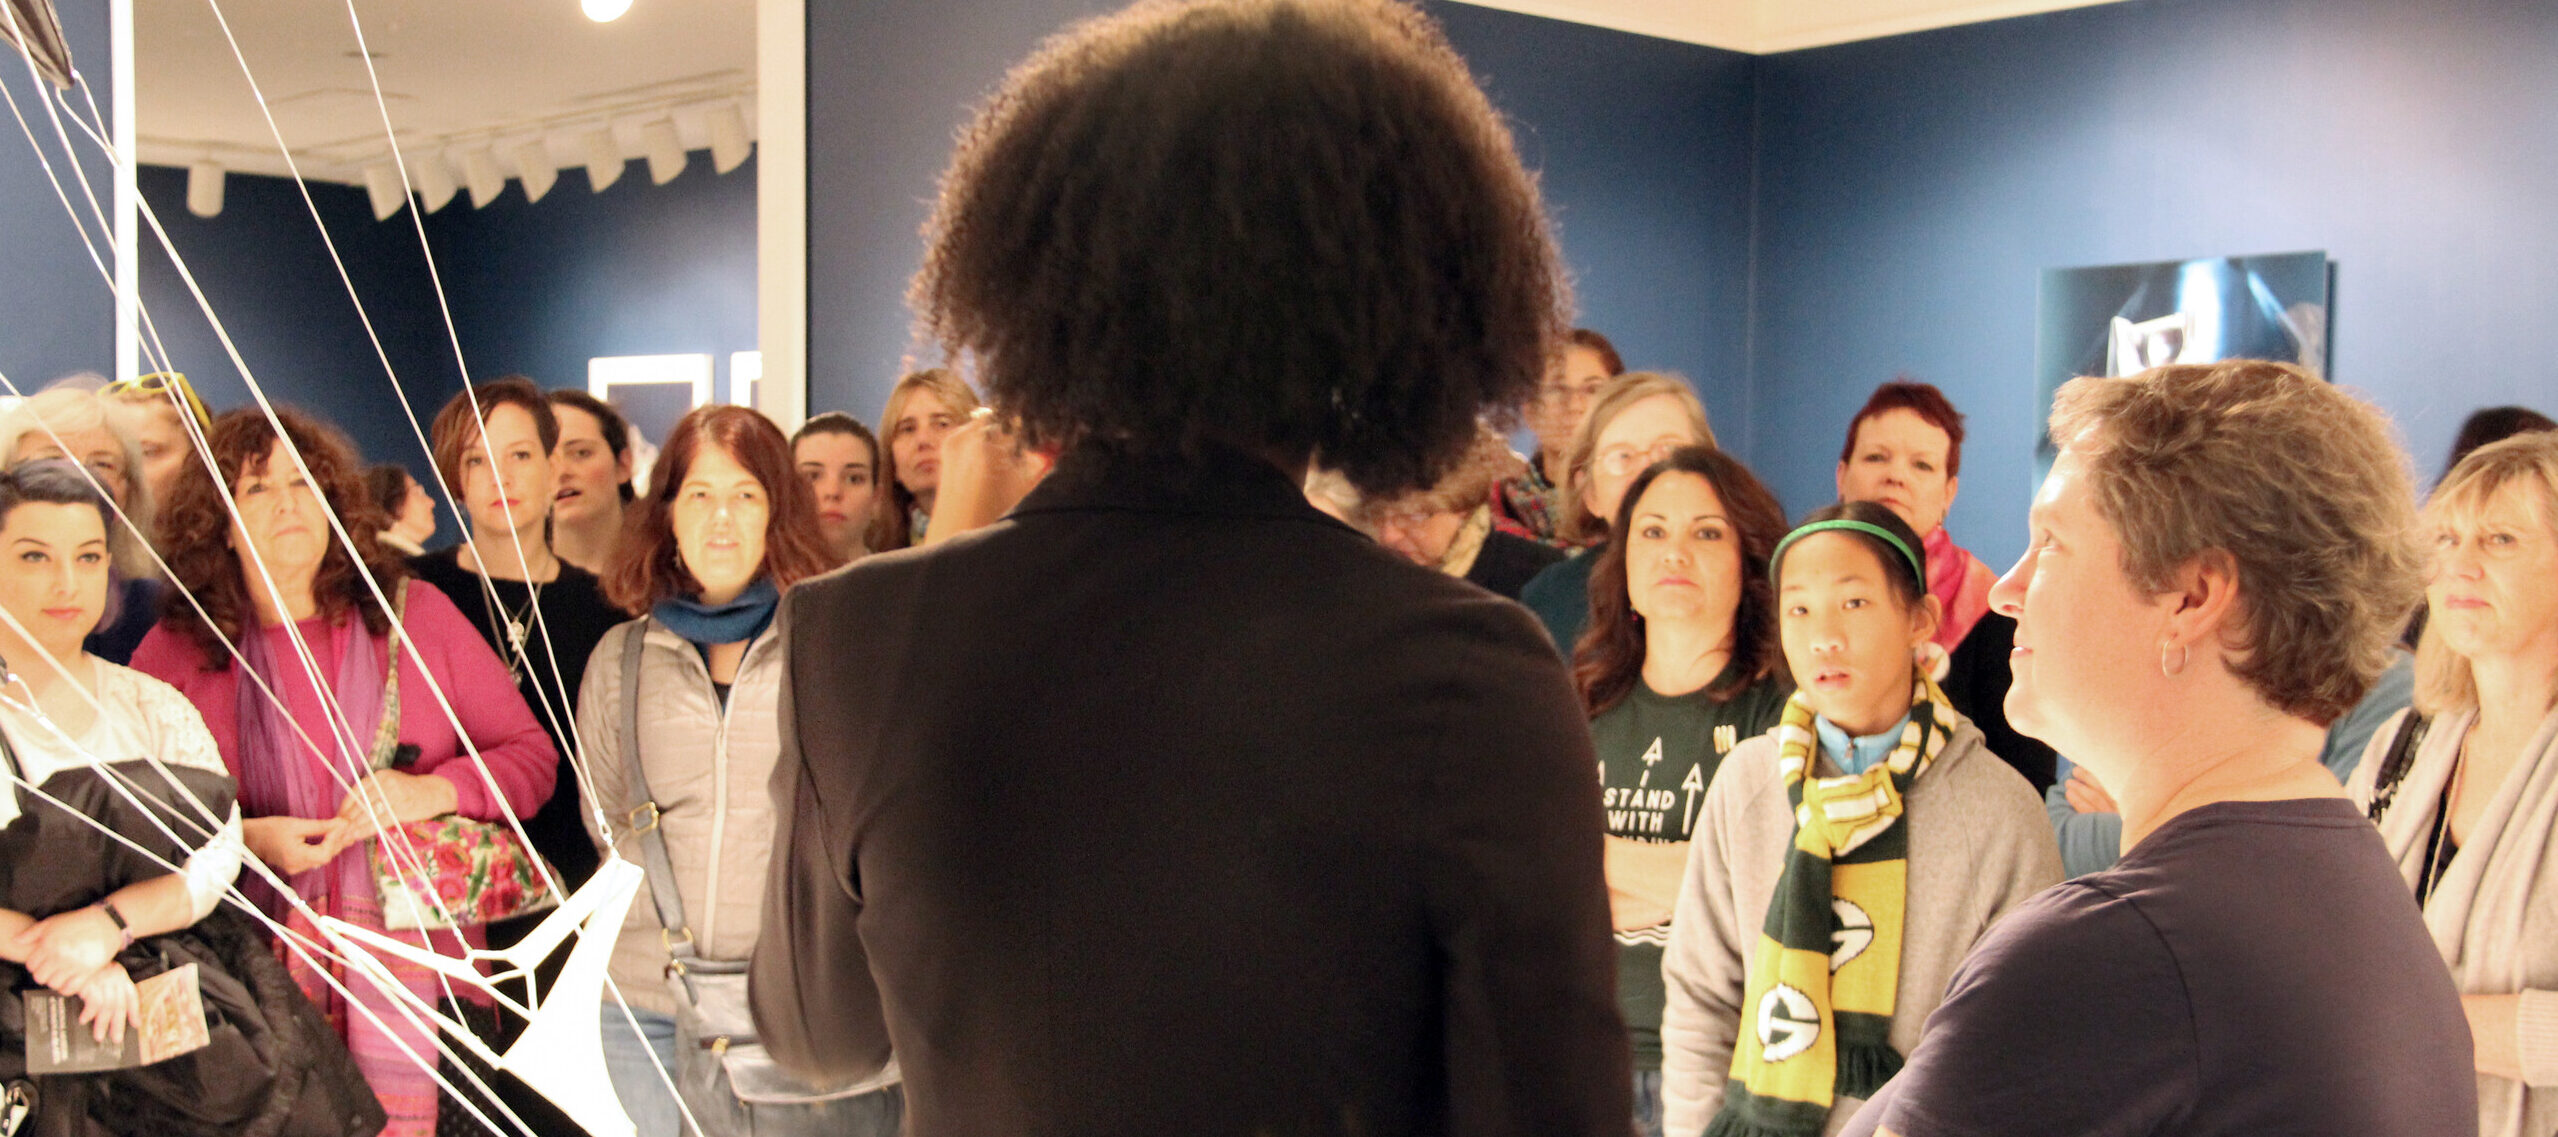 NMWA educator with dark curly hair and a black blazer stands in the foreground with her back to camera as she speaks to a large crowd of visitors about a sculpture composed of hanging strings and fabric in the galleries.